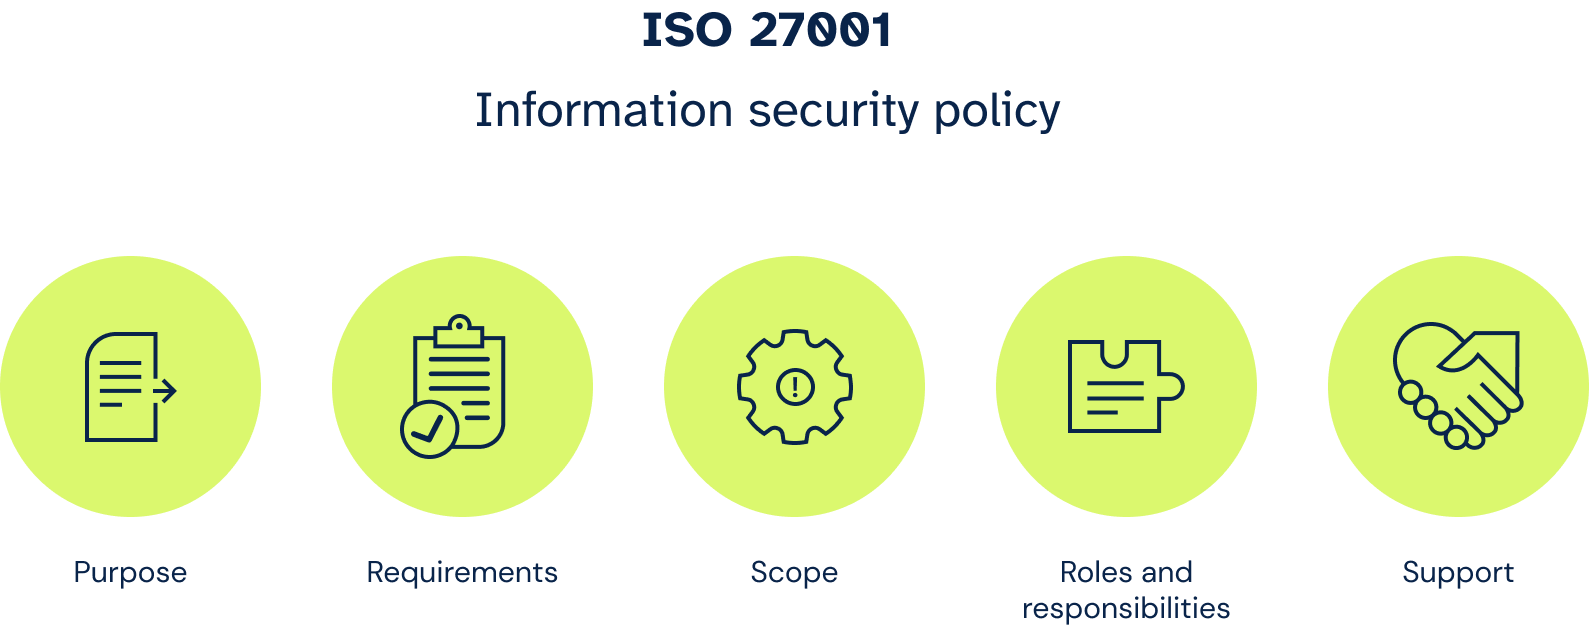 ISO 27001 Information security policy